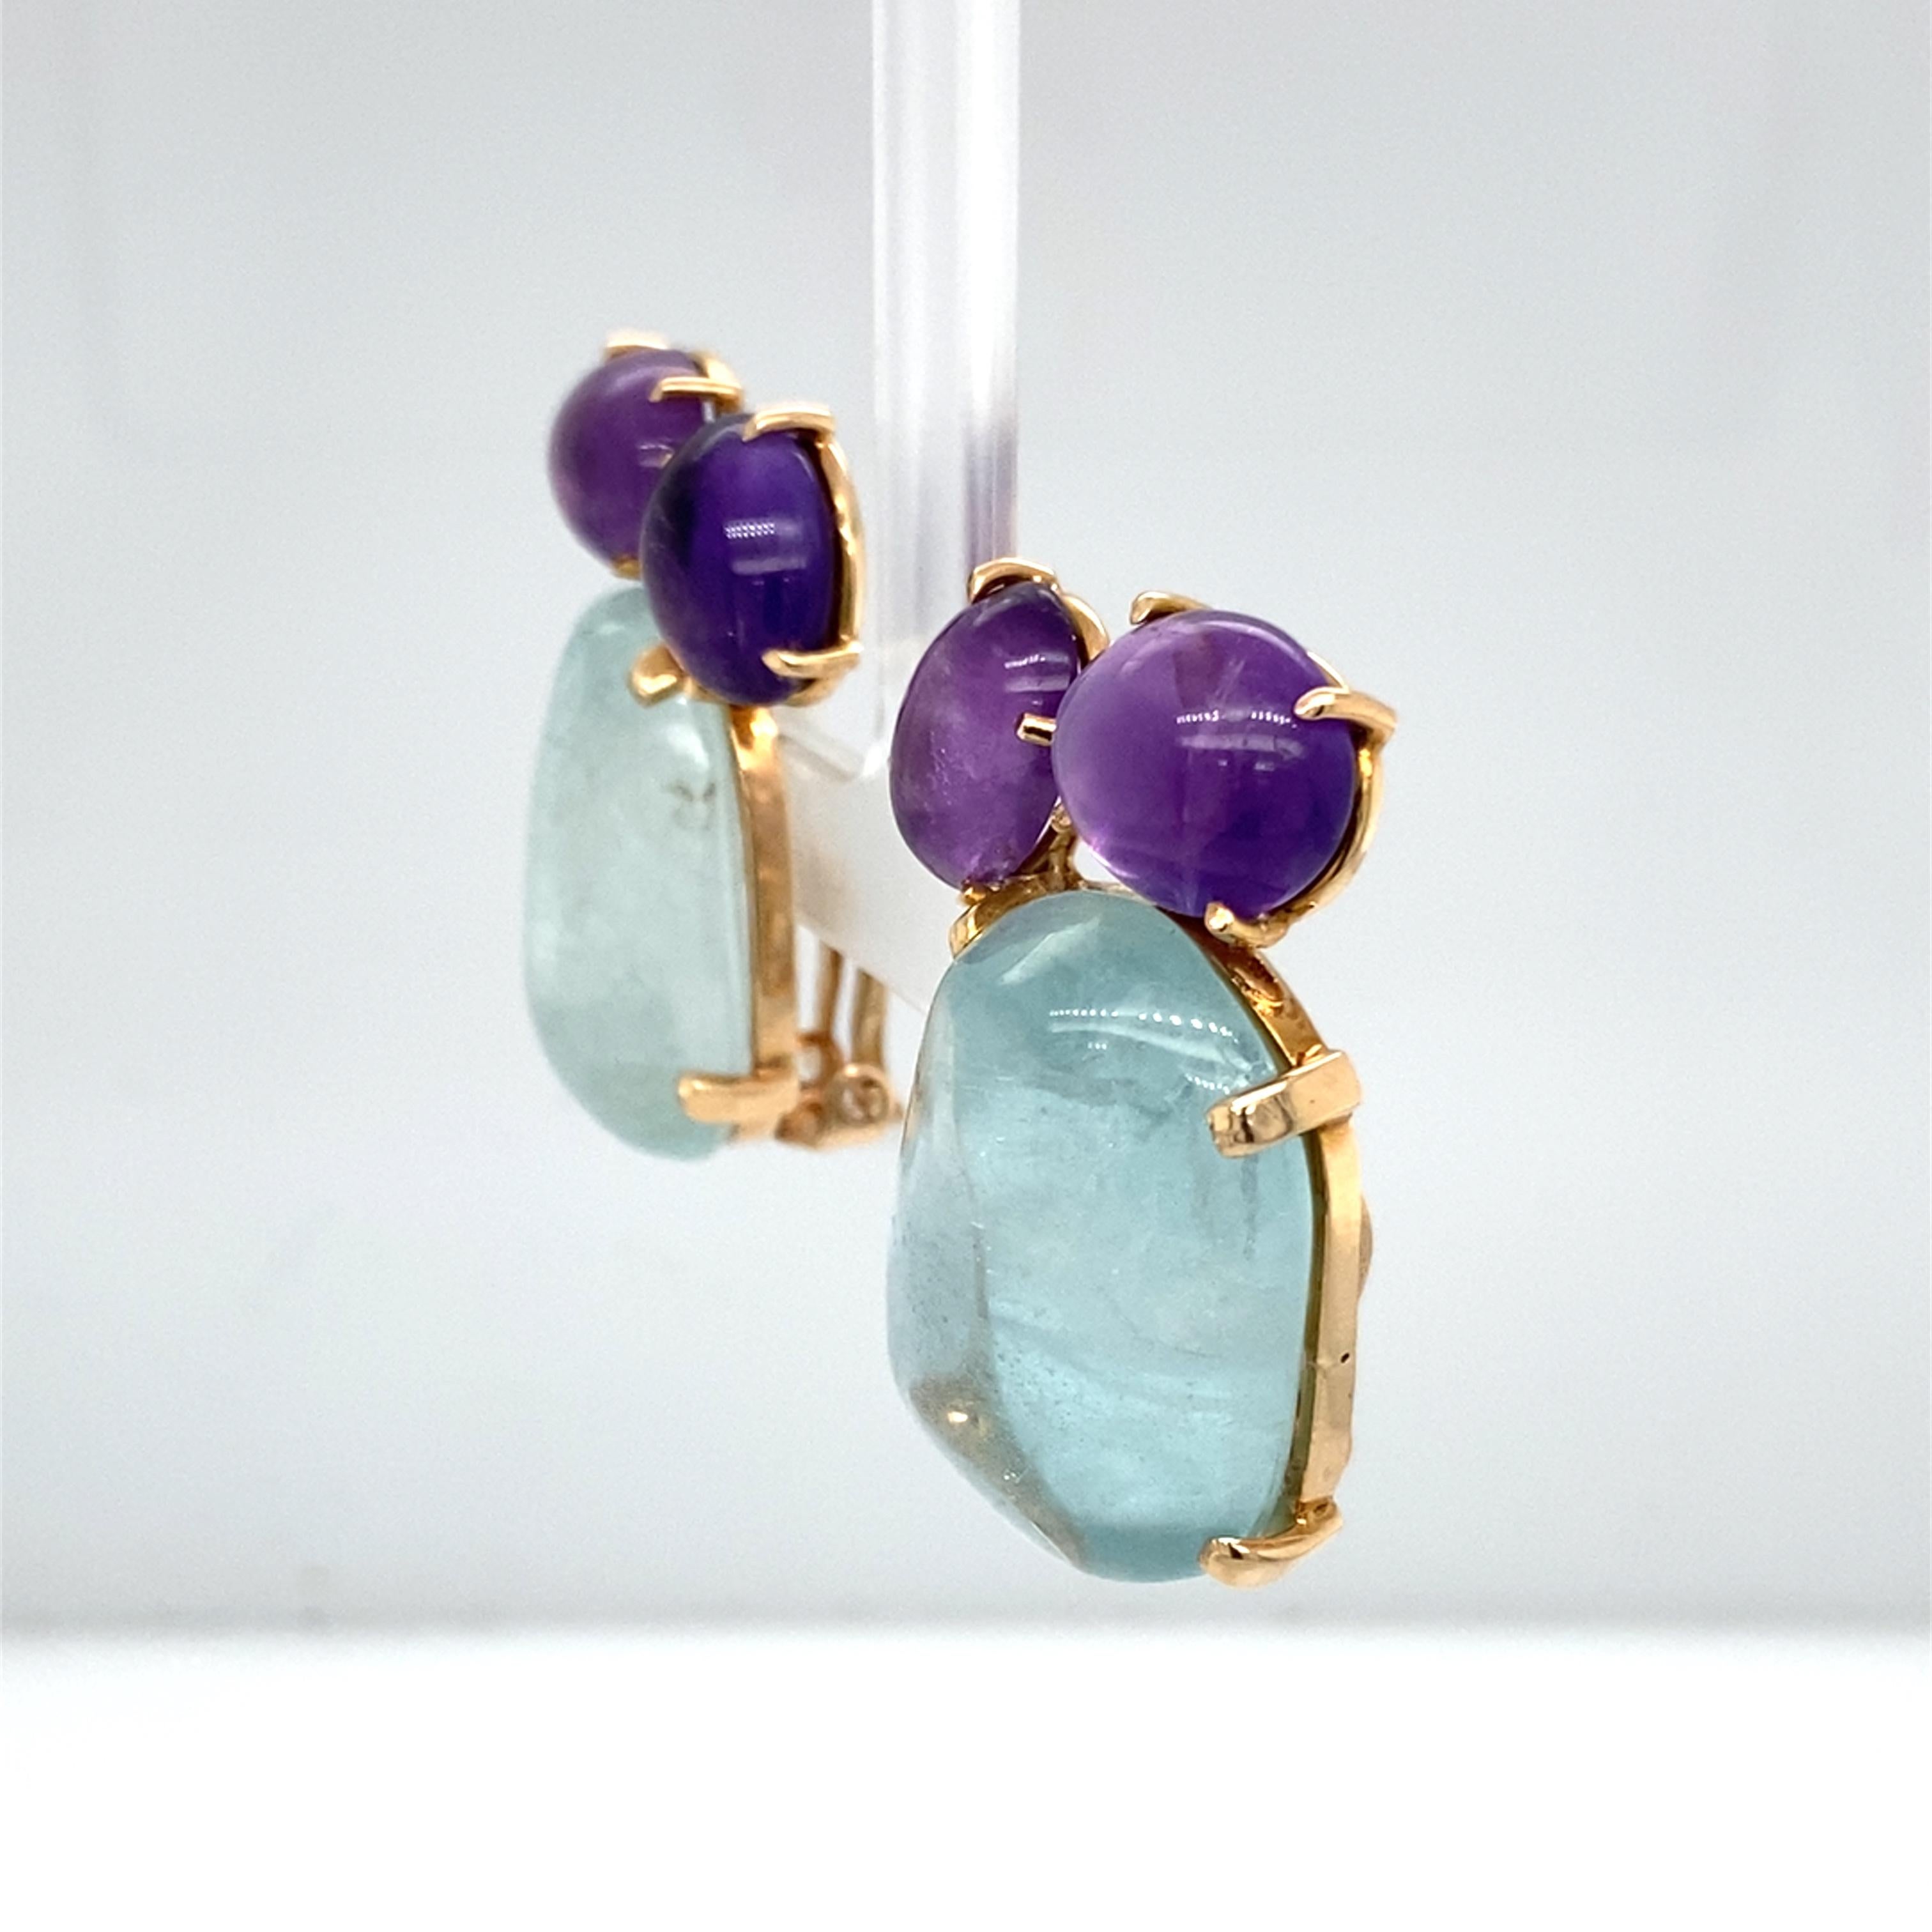 Item Features:
Cabochon Amethyst & Aquamarine
14 Karat Yellow Gold
29.8 grams
1.25 inches length X .75 inches width

Item Details:
Features beautiful Cabochon Amethyst and Aquamarine in 14 karat yellow. Each earring is designed with 2 oval cabochon